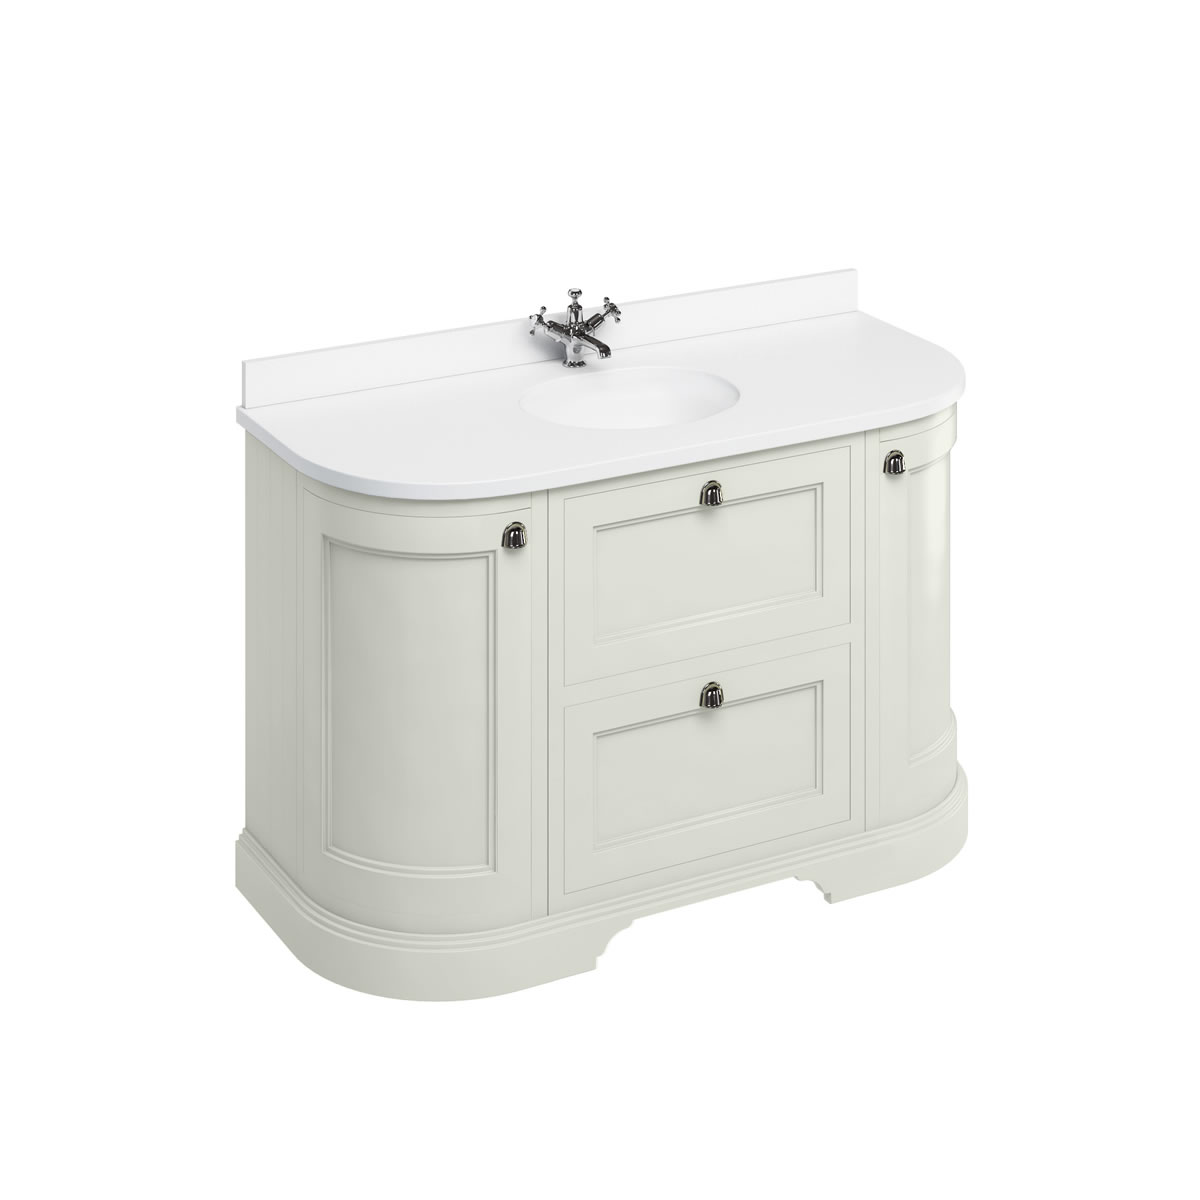 Freestanding 134 Curved Vanity Unit with drawers - Sand White and Minerva white worktop with integrated white basin